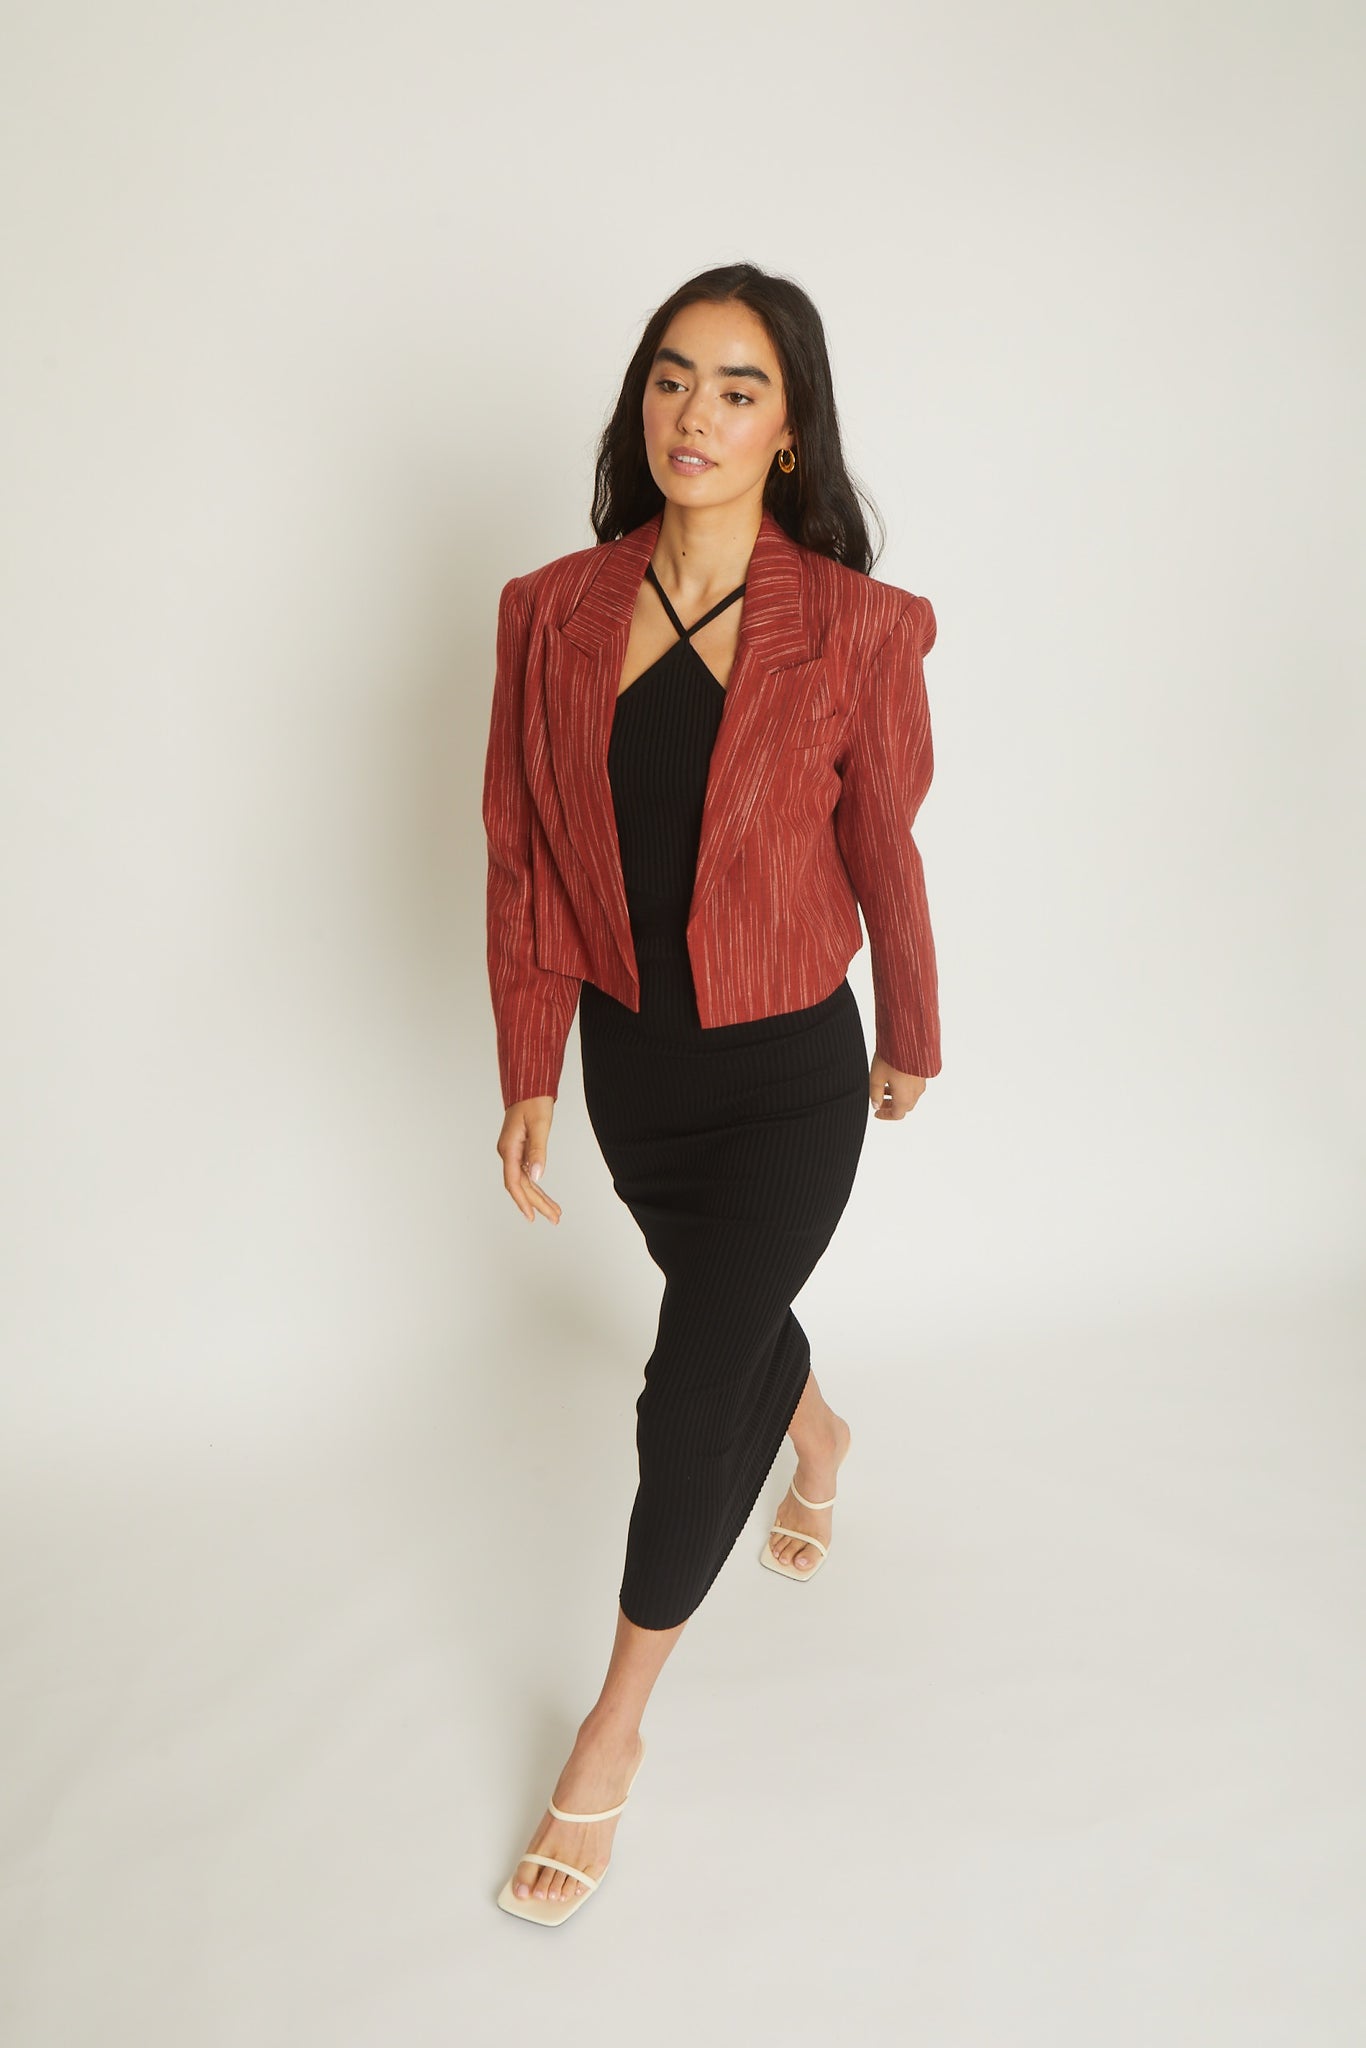 Cropped Dried Rose Red Blazer Jacket Lapel Collar Spring Summer Style Bright Red Sexy Cropped Jacket Womens Style Workwear Office Wear Elevated Outerwear Sophisticated Chic